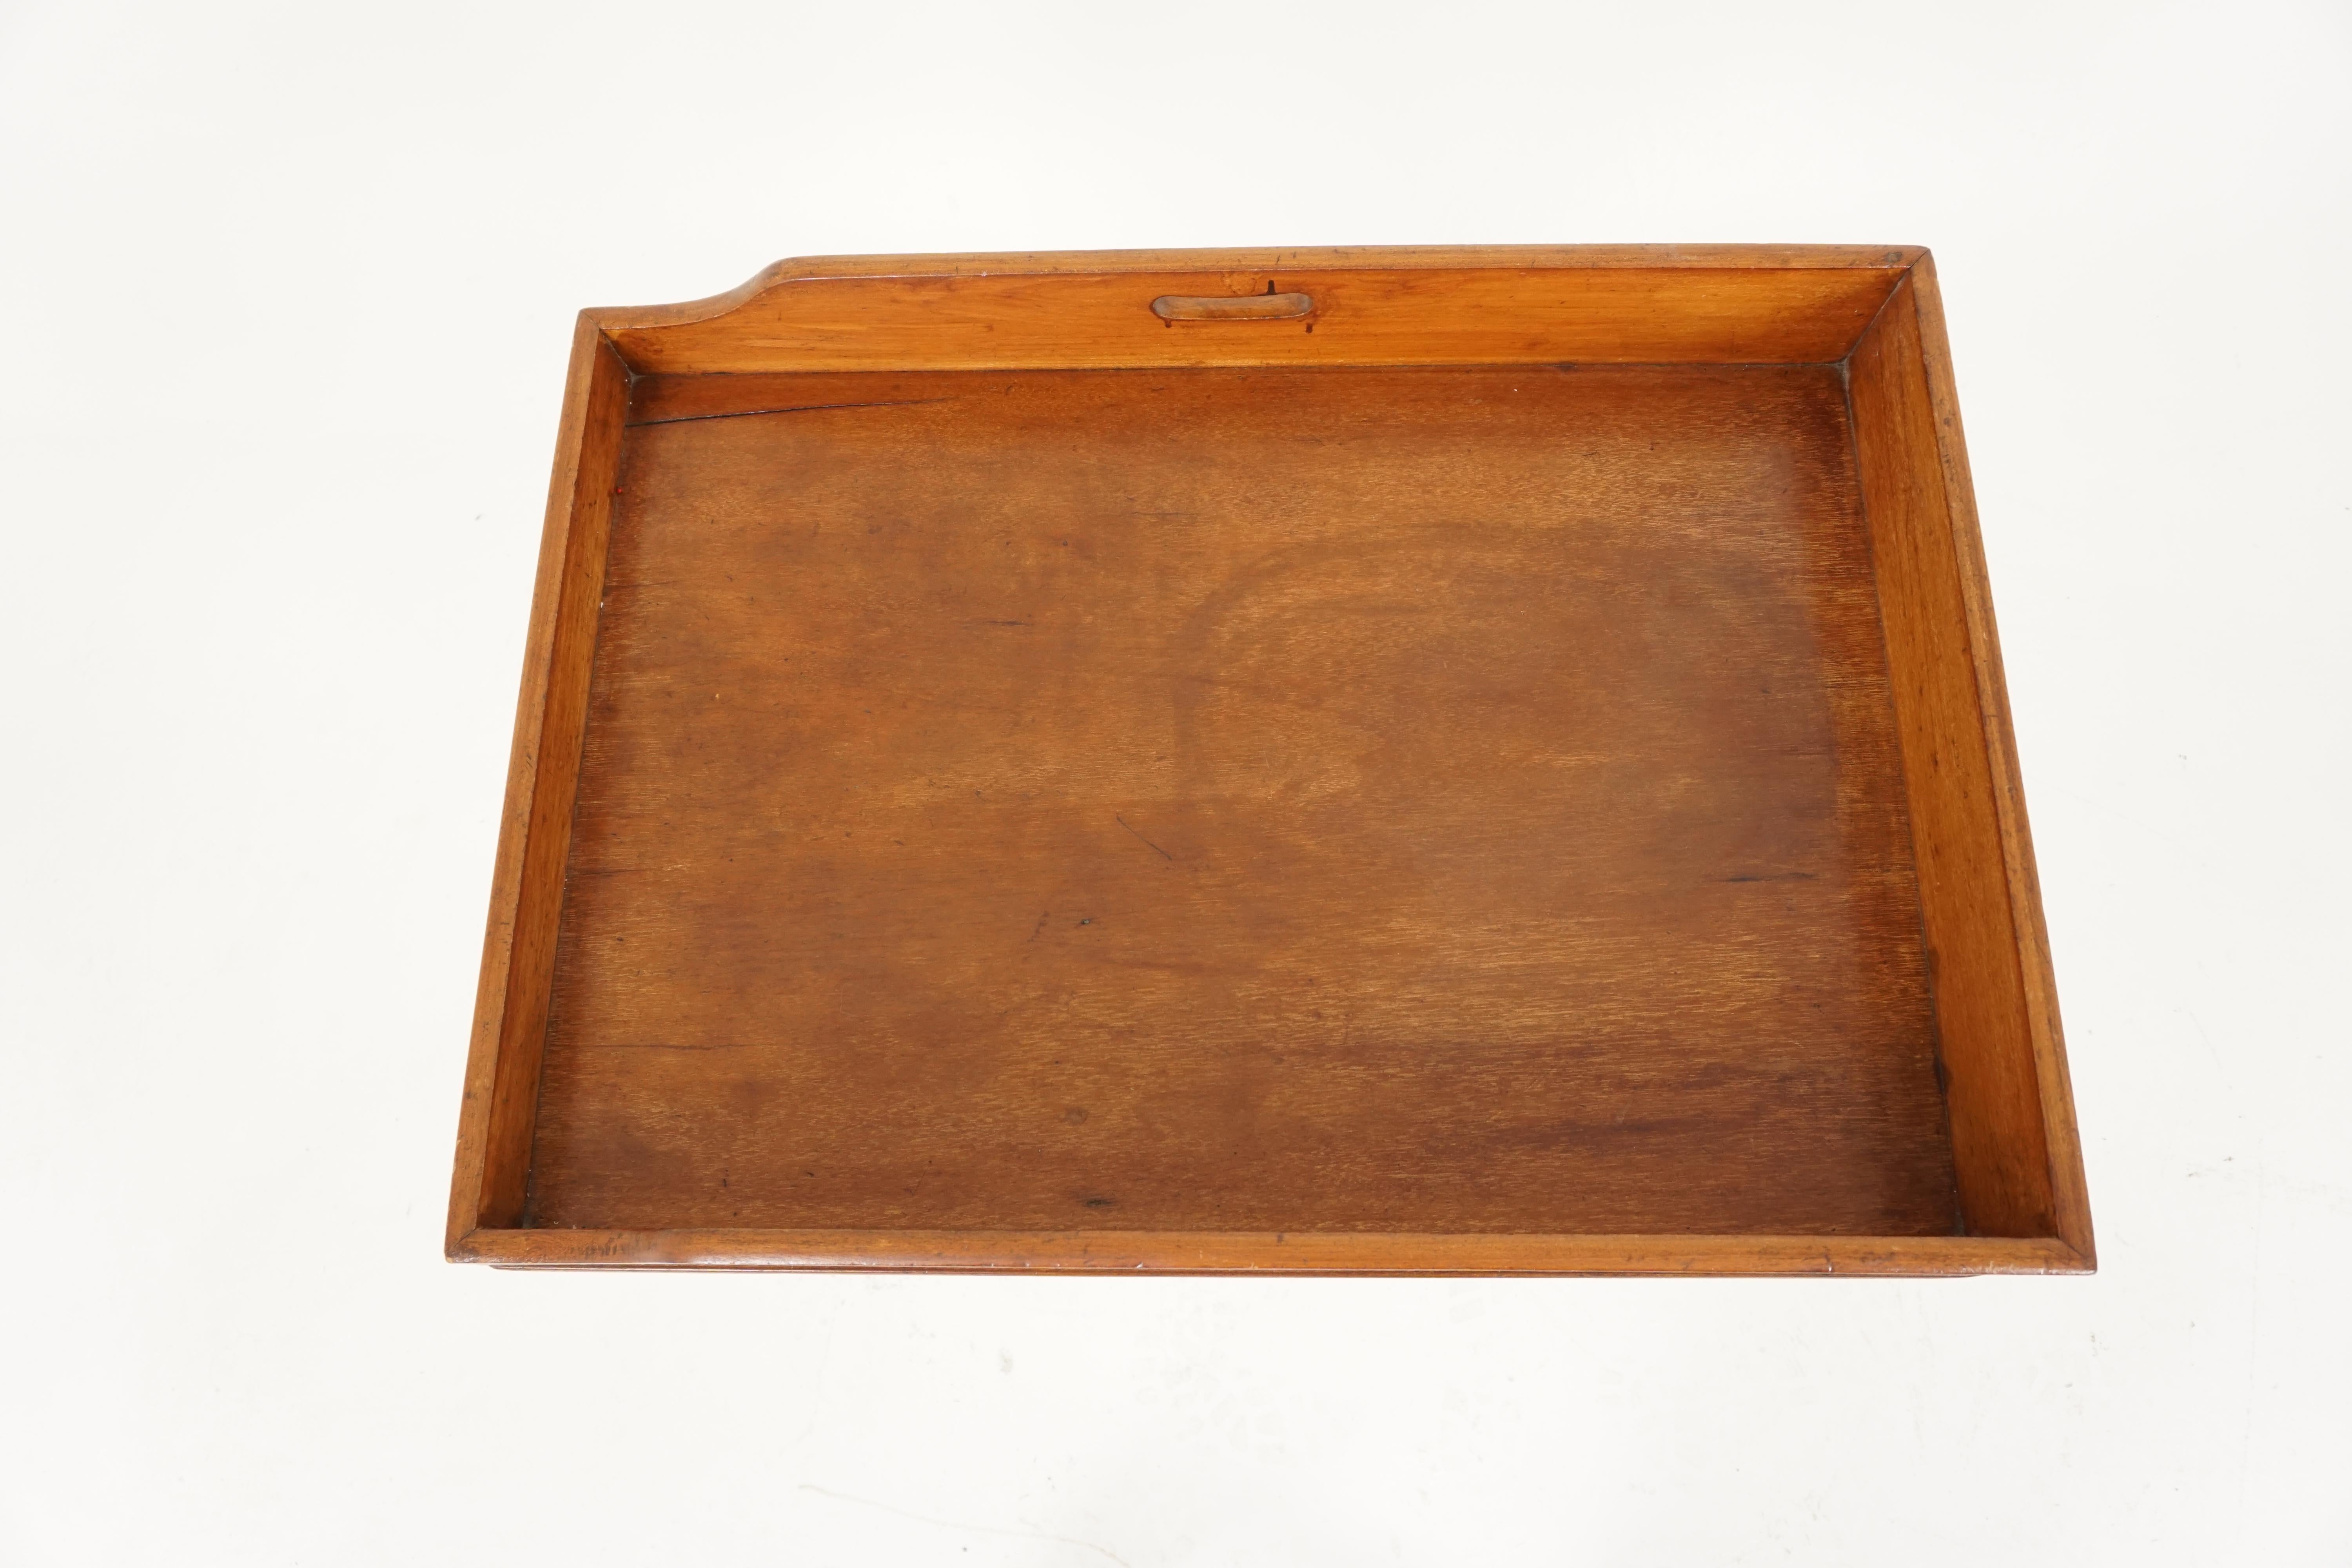 Antique Butler's Tray, Victorian walnut drinks tray or stand, Antique Furniture, Scotland 1870, B2034

Scotland 1870
Solid walnut
Original finish
Front loading tray with raised sides
With hand cut dovetailed joints
Shaped side carrying